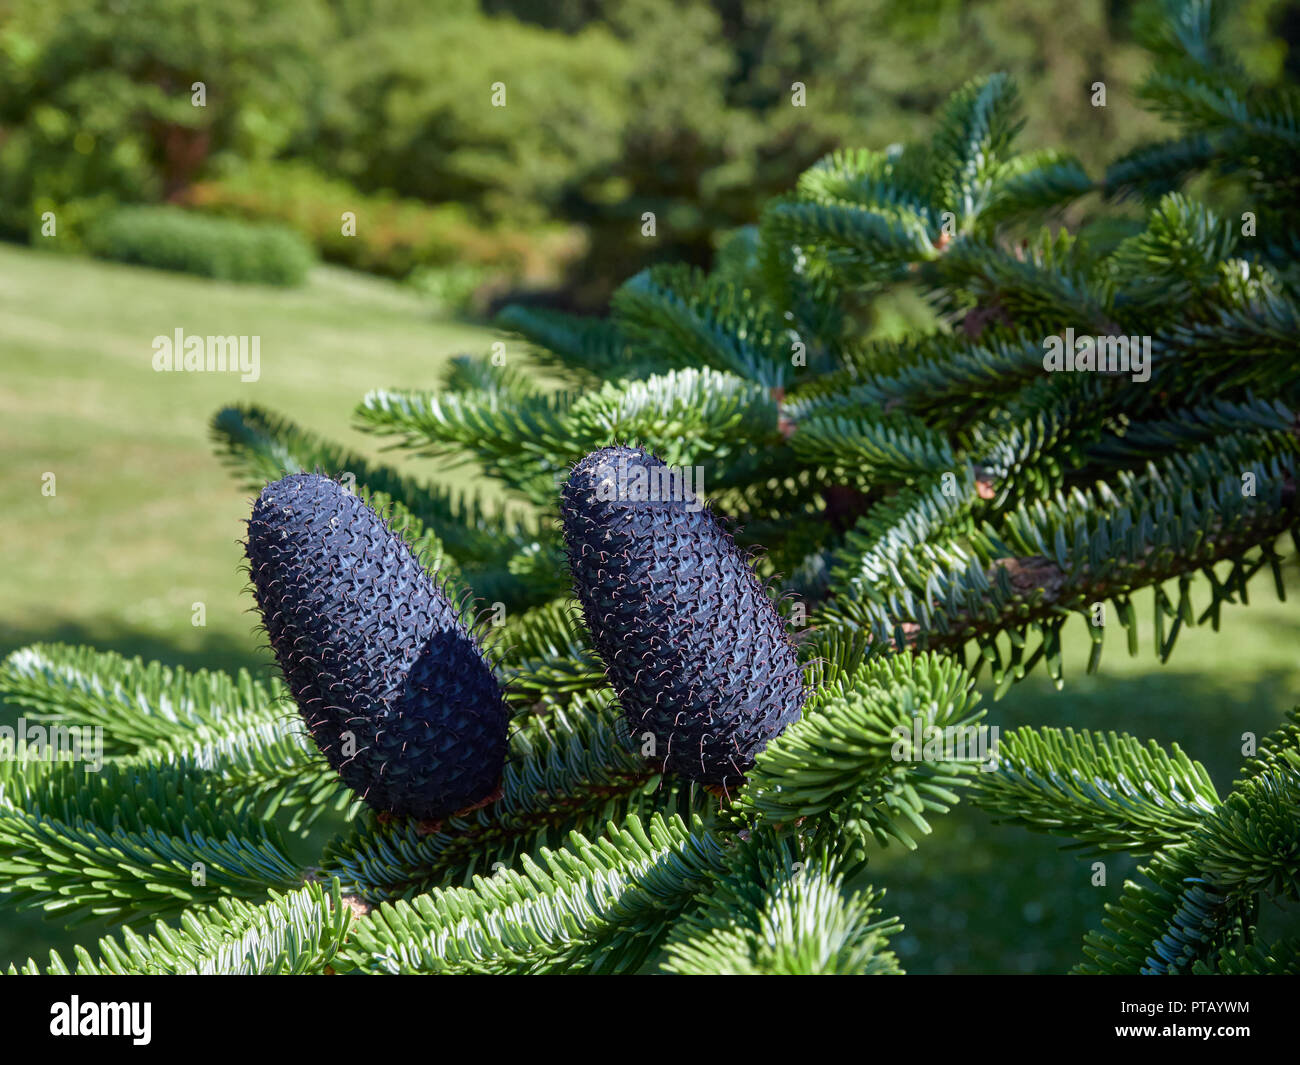 Fir Cones of the Delavays Fir, Abies delavayi standing upright on the branches of the Tree at the St Andrews Botanic Gardens in Fife, Scotland. Stock Photo